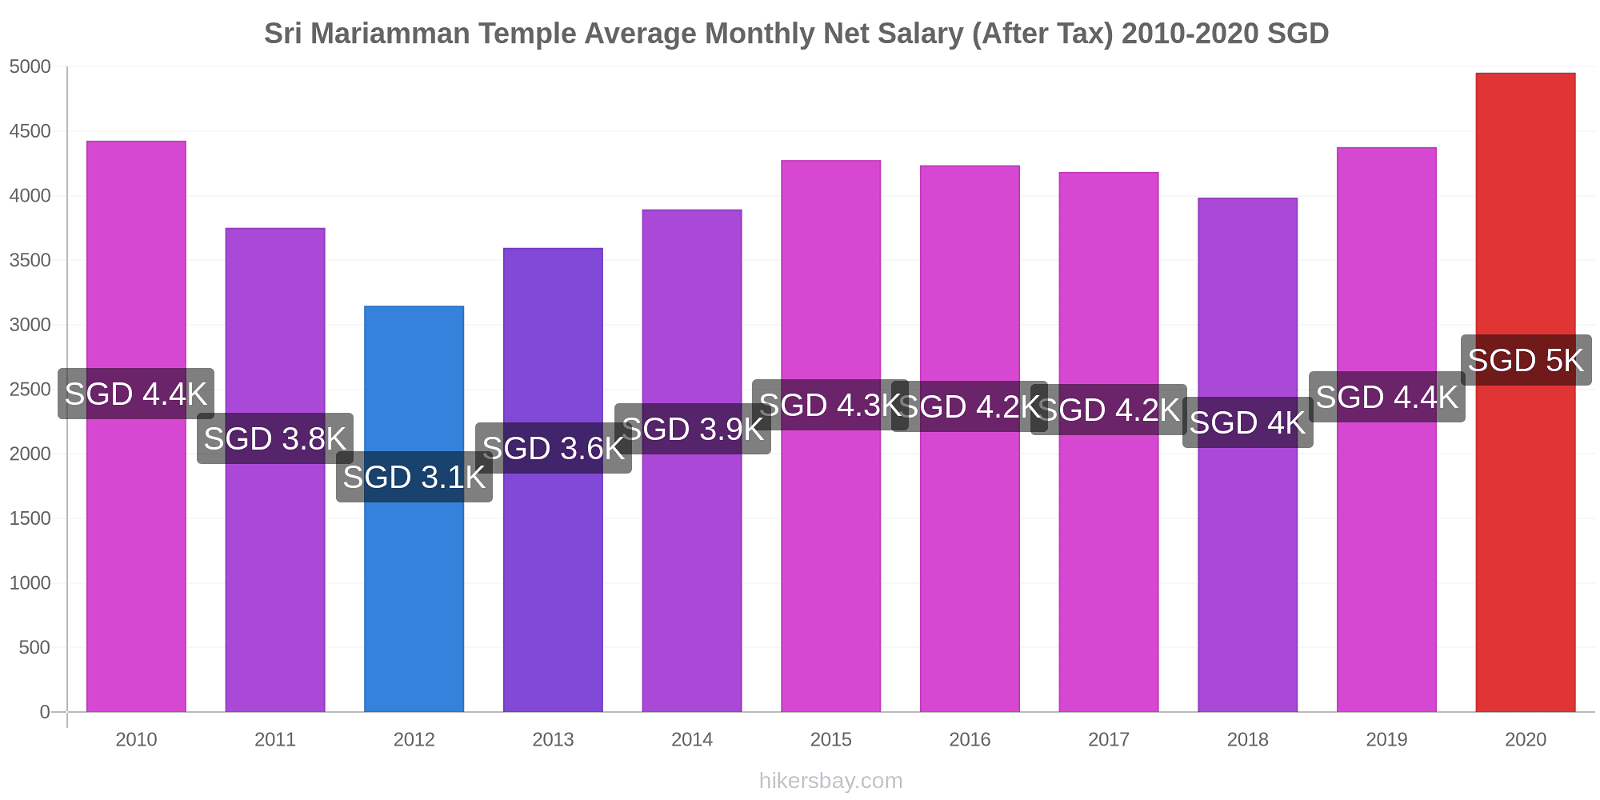 Sri Mariamman Temple price changes Average Monthly Net Salary (After Tax) hikersbay.com